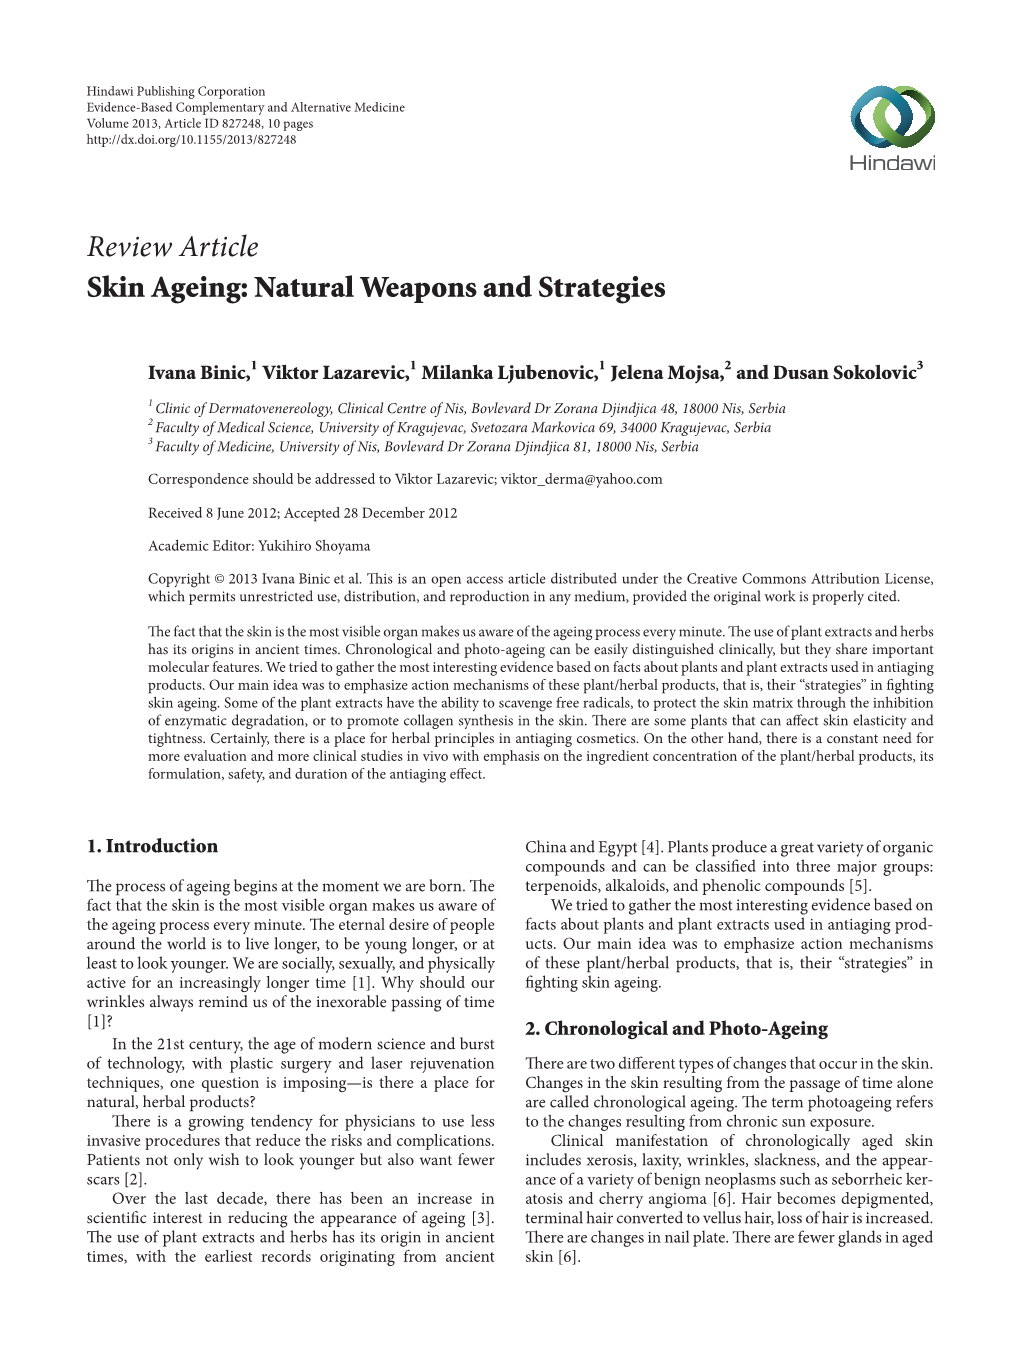 Review Article Skin Ageing: Natural Weapons and Strategies